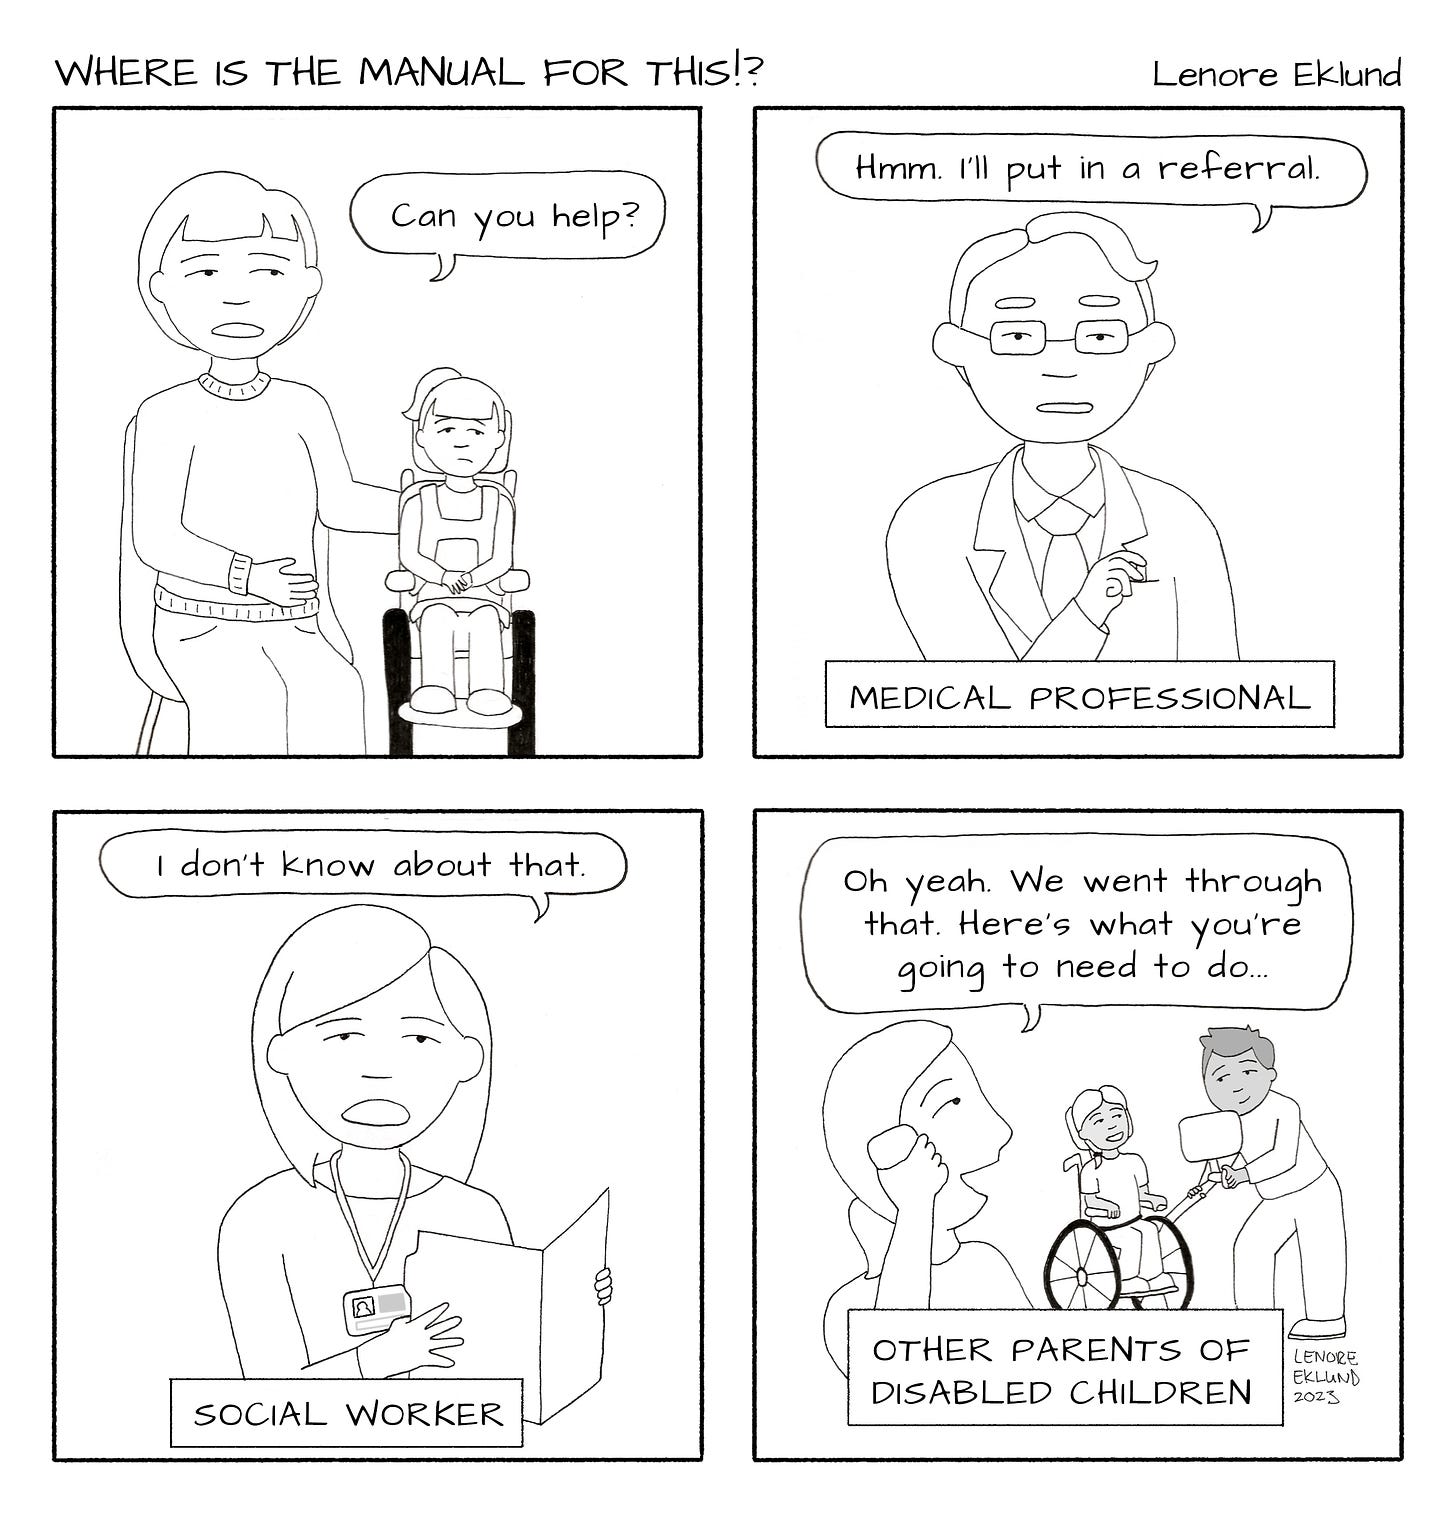 A four-panel line drawing cartoon titled Where is the manual for this!? by Lenore Eklund. In the first panel, a mother sits with her arm around her daughter in a wheelchair and says: “Can you help?” The second panel shows an older male with square-rimmed glasses and a suit titled: Medical Professional. He says: “Hmm. I’ll put in a referral.” The next panel is titled Social Worker. A woman with a file folder and an ID badge says “I don’t know about that.” In the final panel, titled Other Parents of Disabled Children, a mom on the phone says “Oh yeah. We went through that. Here’s what you’re going to need to do…” while her husband and child in the background play with a handheld mirror. 